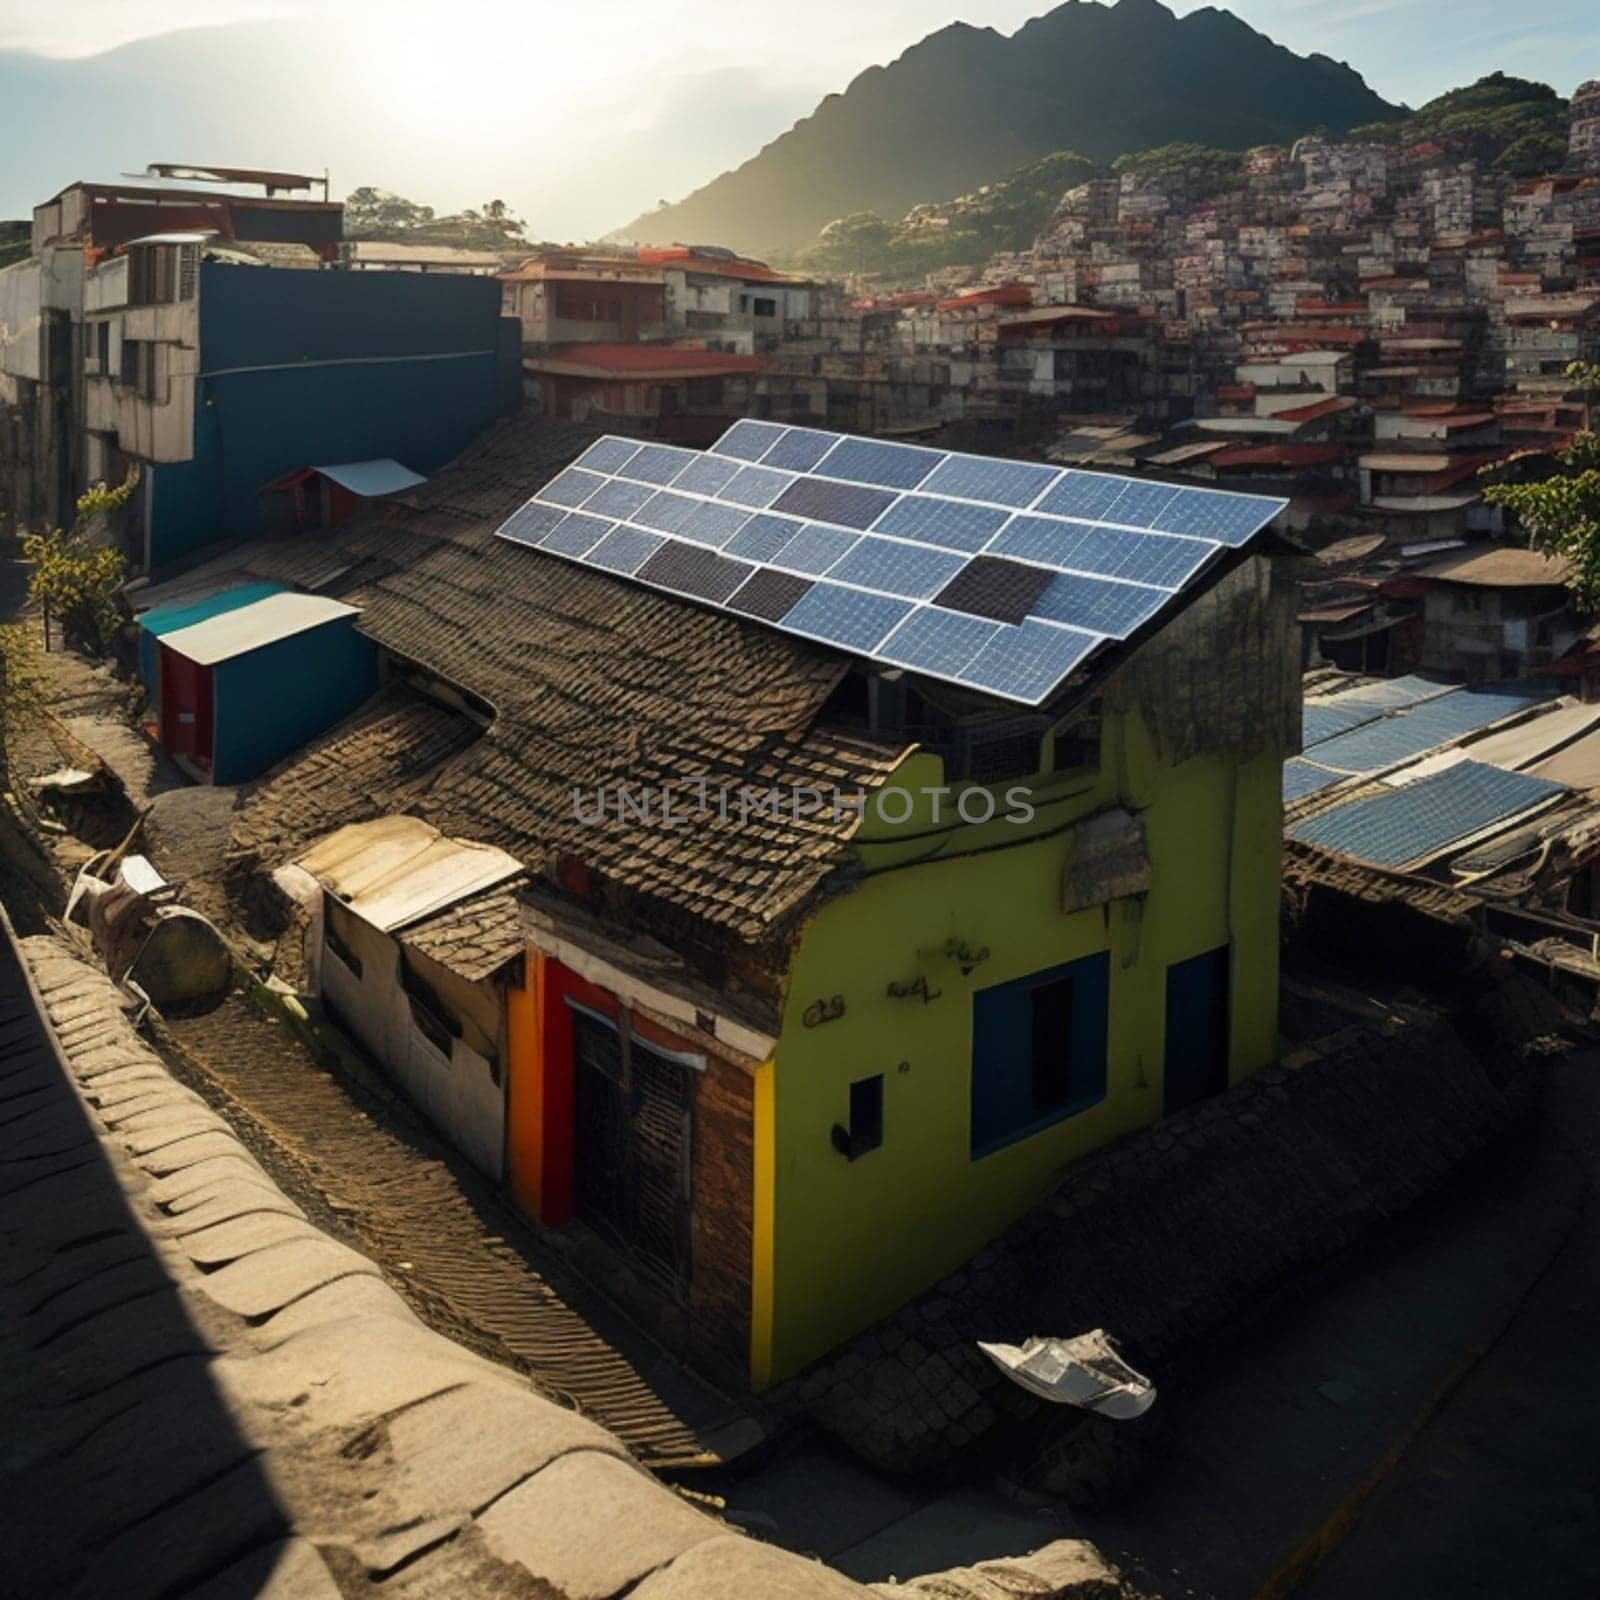 photovoltaic solar panels on slum hood for clean and cheap energy by verbano